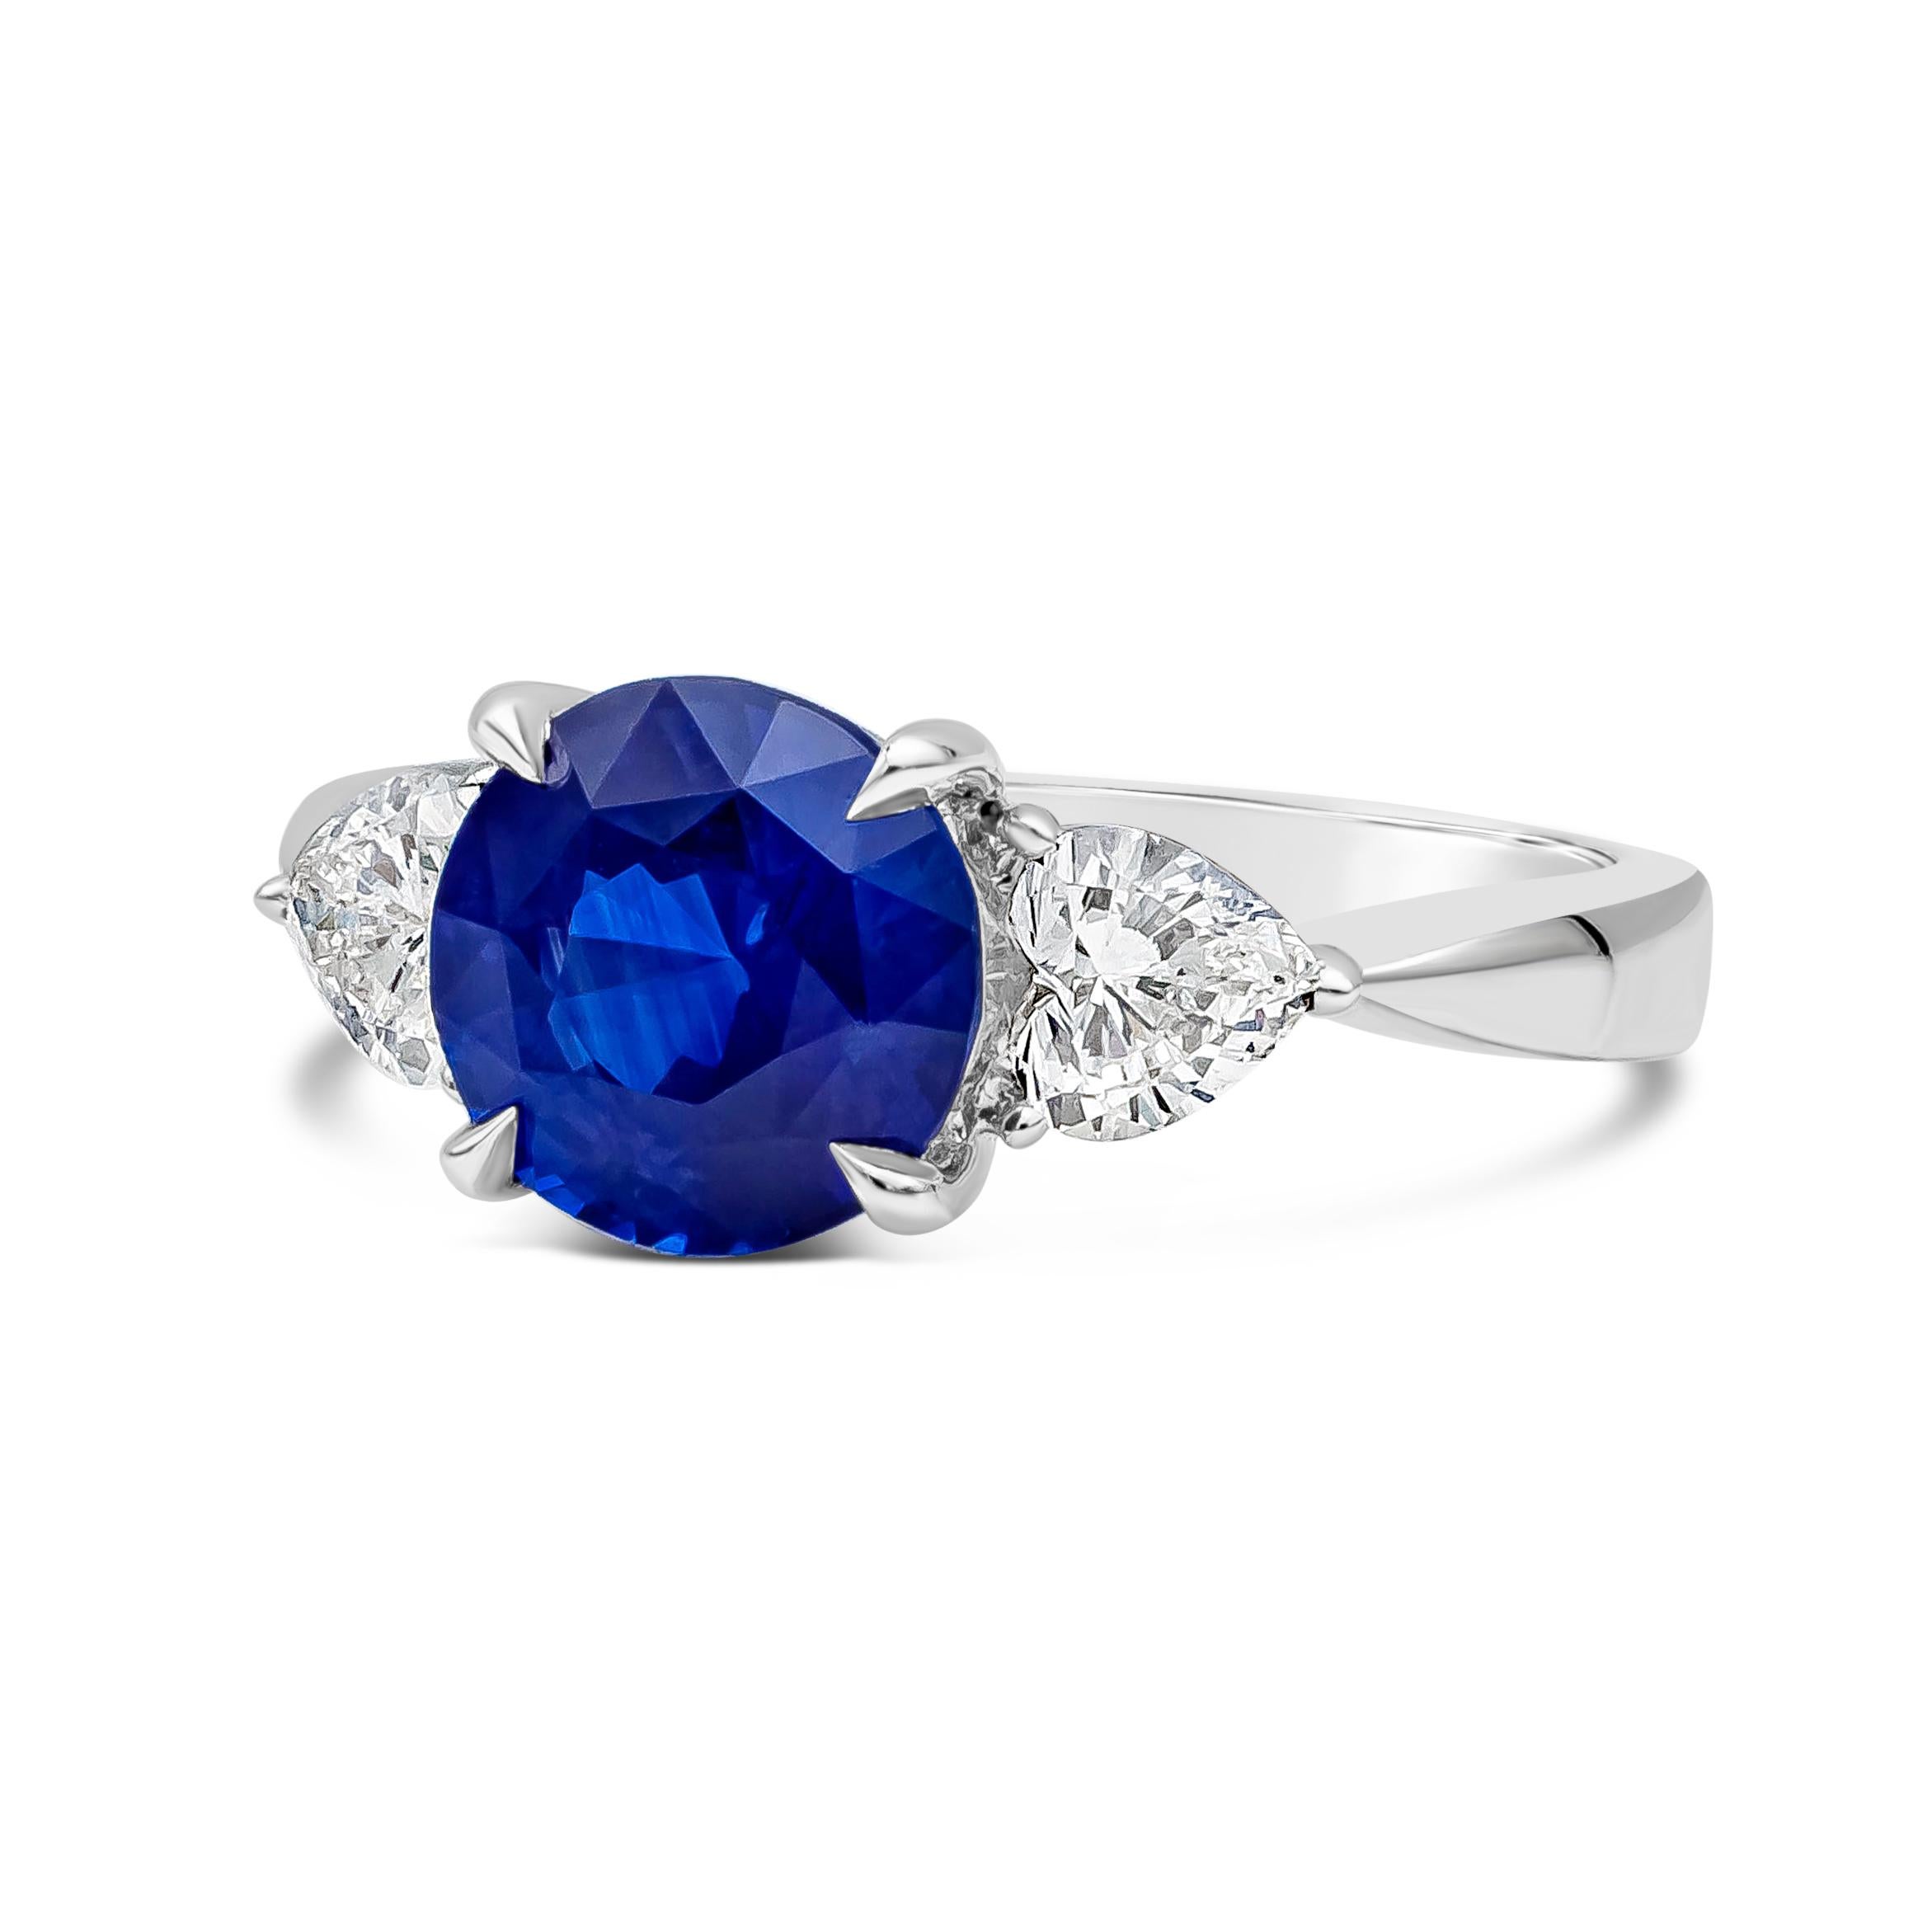 A classic and unique three-stone engagement ring, showcasing a 2.77 carat round cut blue sapphire. Flanked by heart shape diamonds weighing 0.65 carats total. Set in a chic knife-edge made of platinum. Size 6.5 US.

Roman Malakov is a custom house,